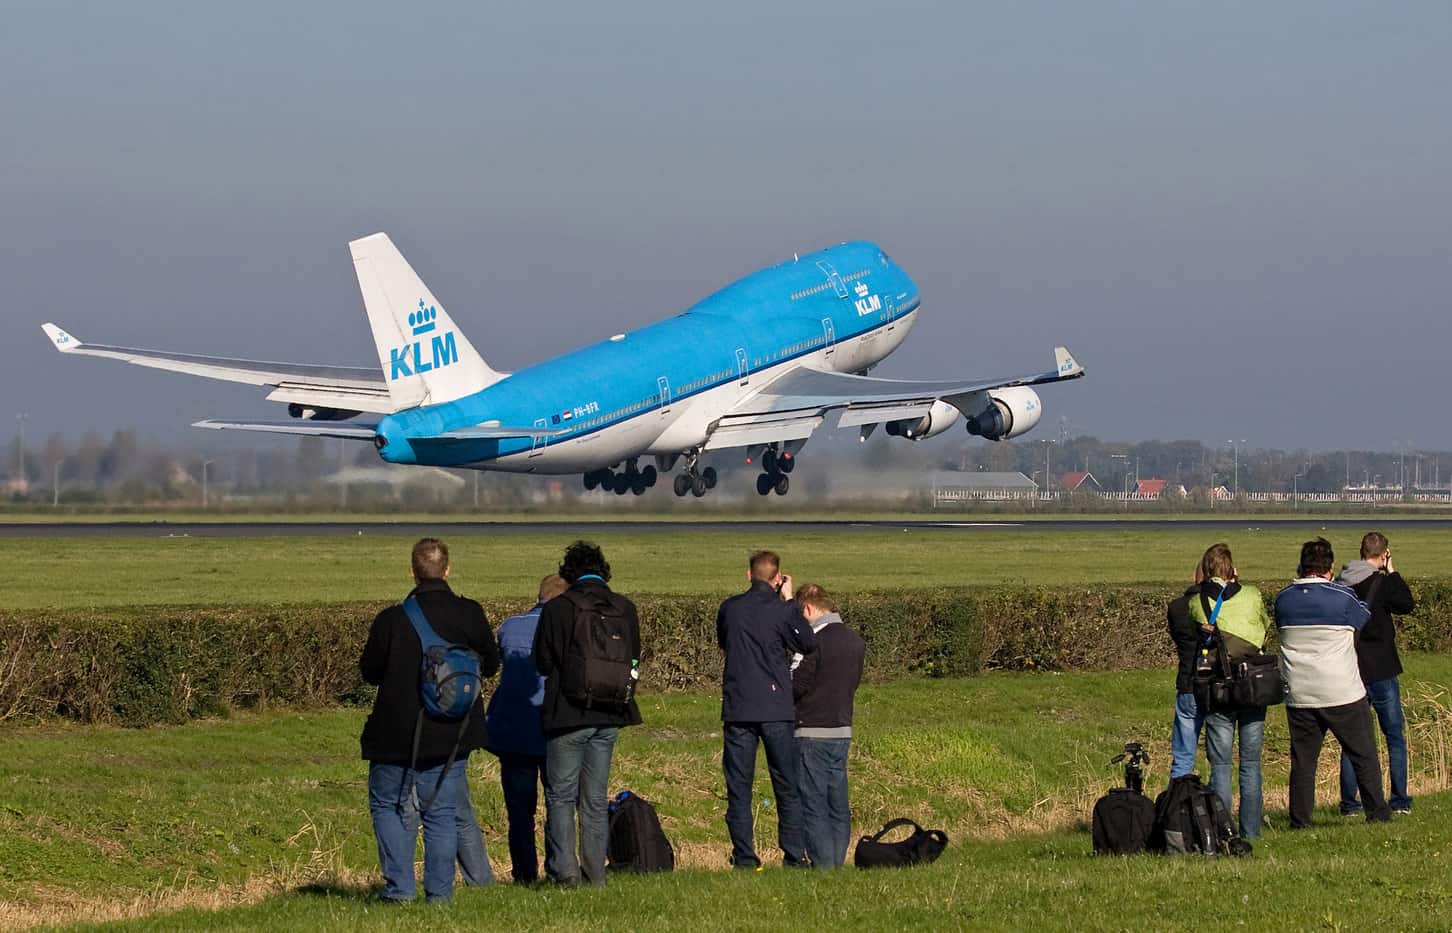 Nostalgia for the Jumbo...and the end of plane spotting?